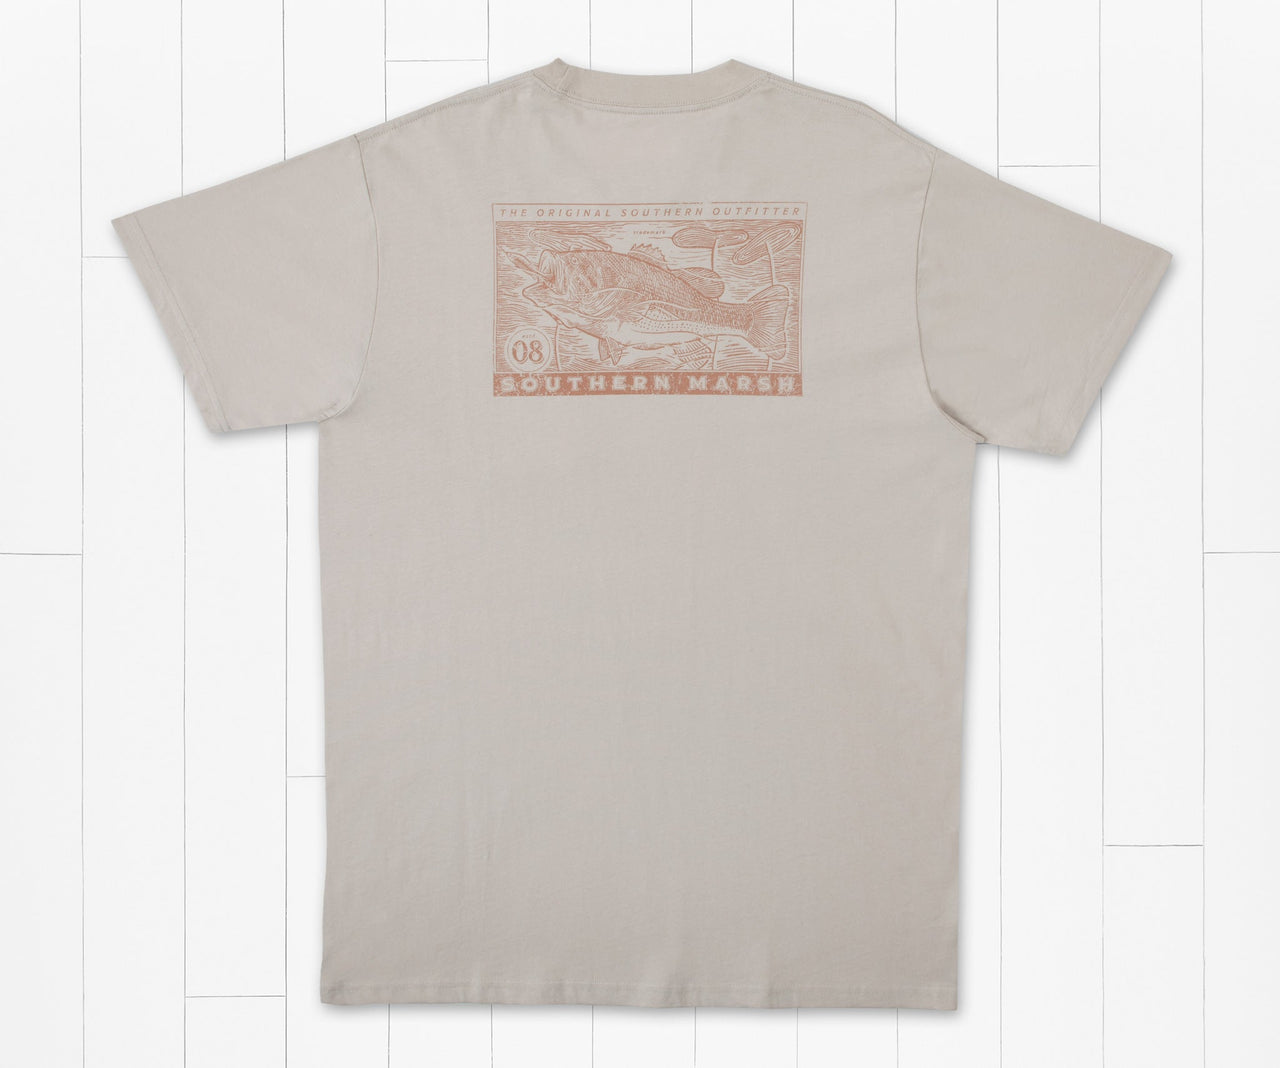 Etched Bass SS Pocket Tee